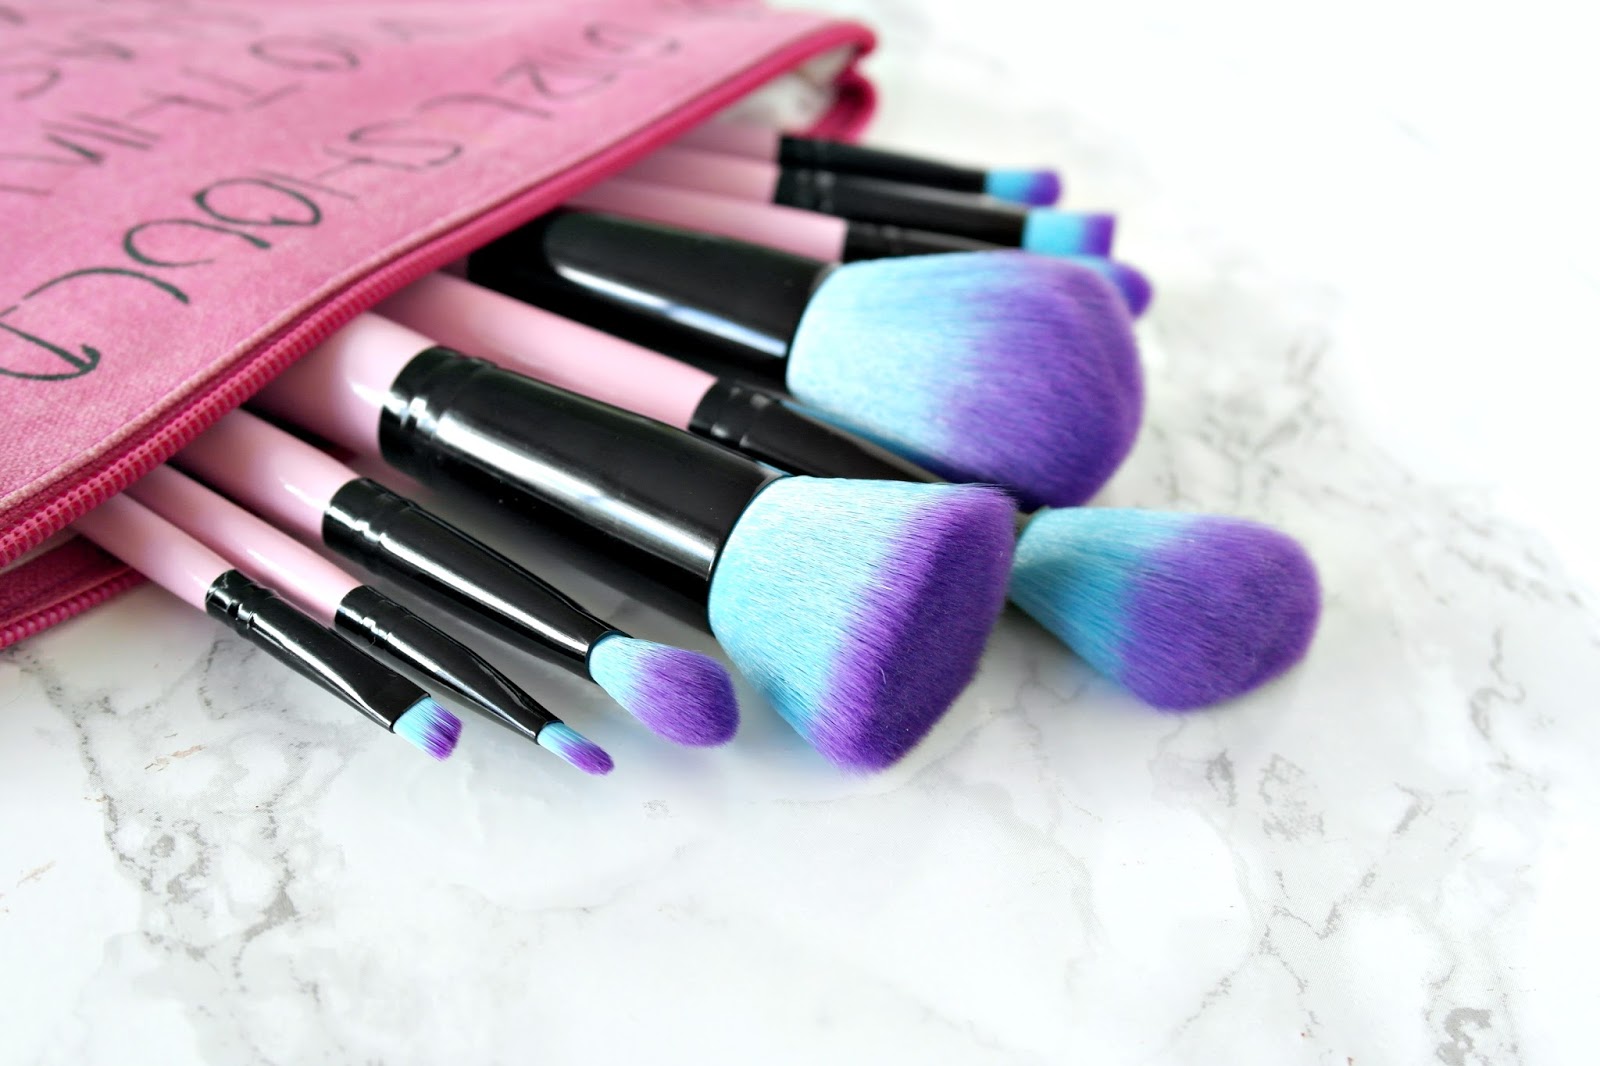 spectrum collections, 10 piece essential kit, review,pink makeup brushes